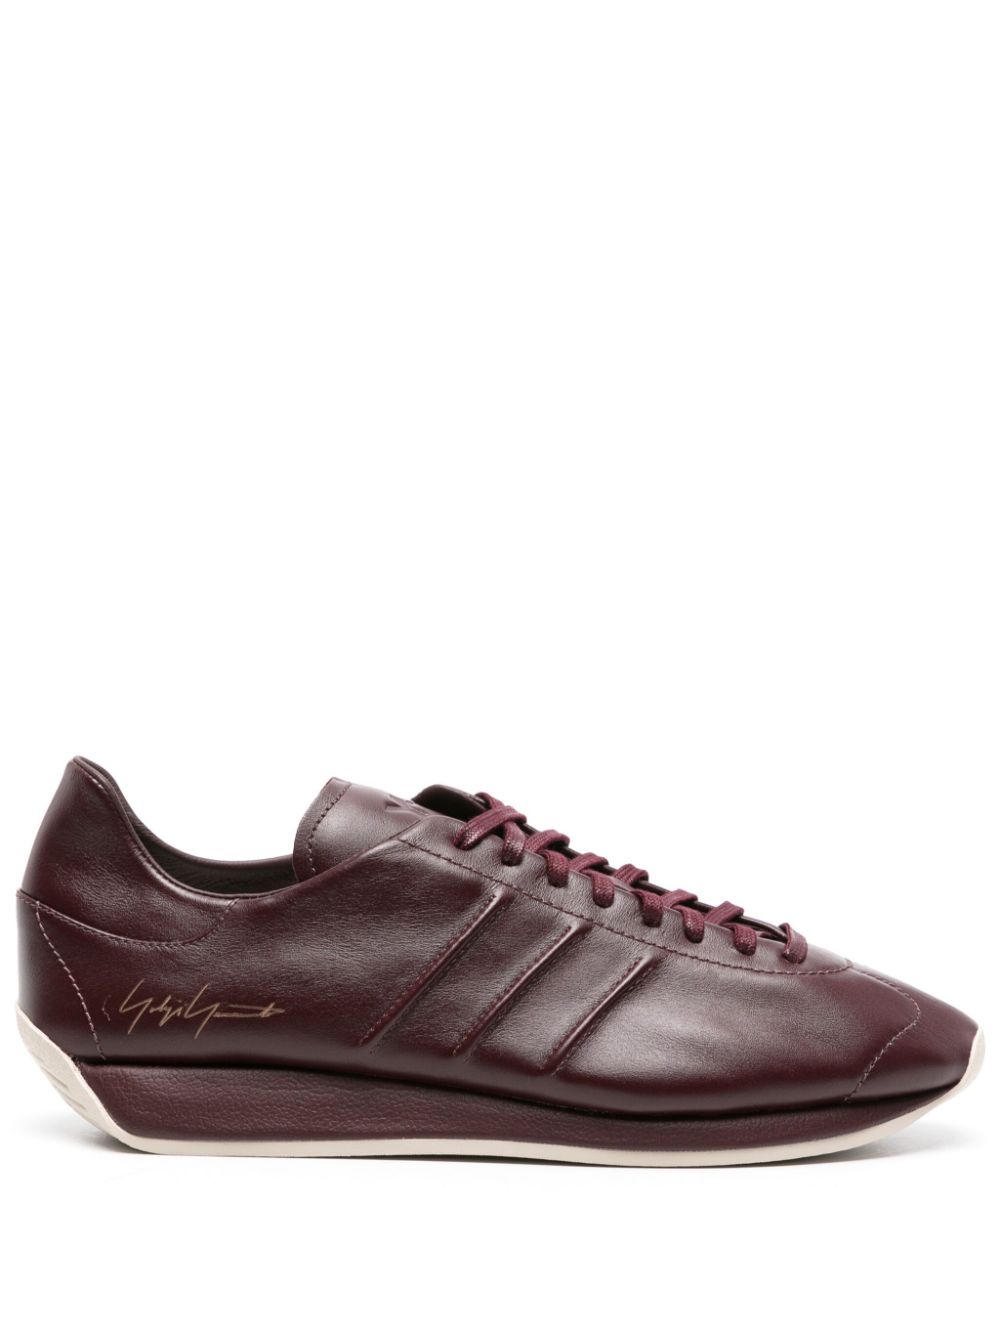 Y-3 x Adidas Country leather sneakers - Rosso